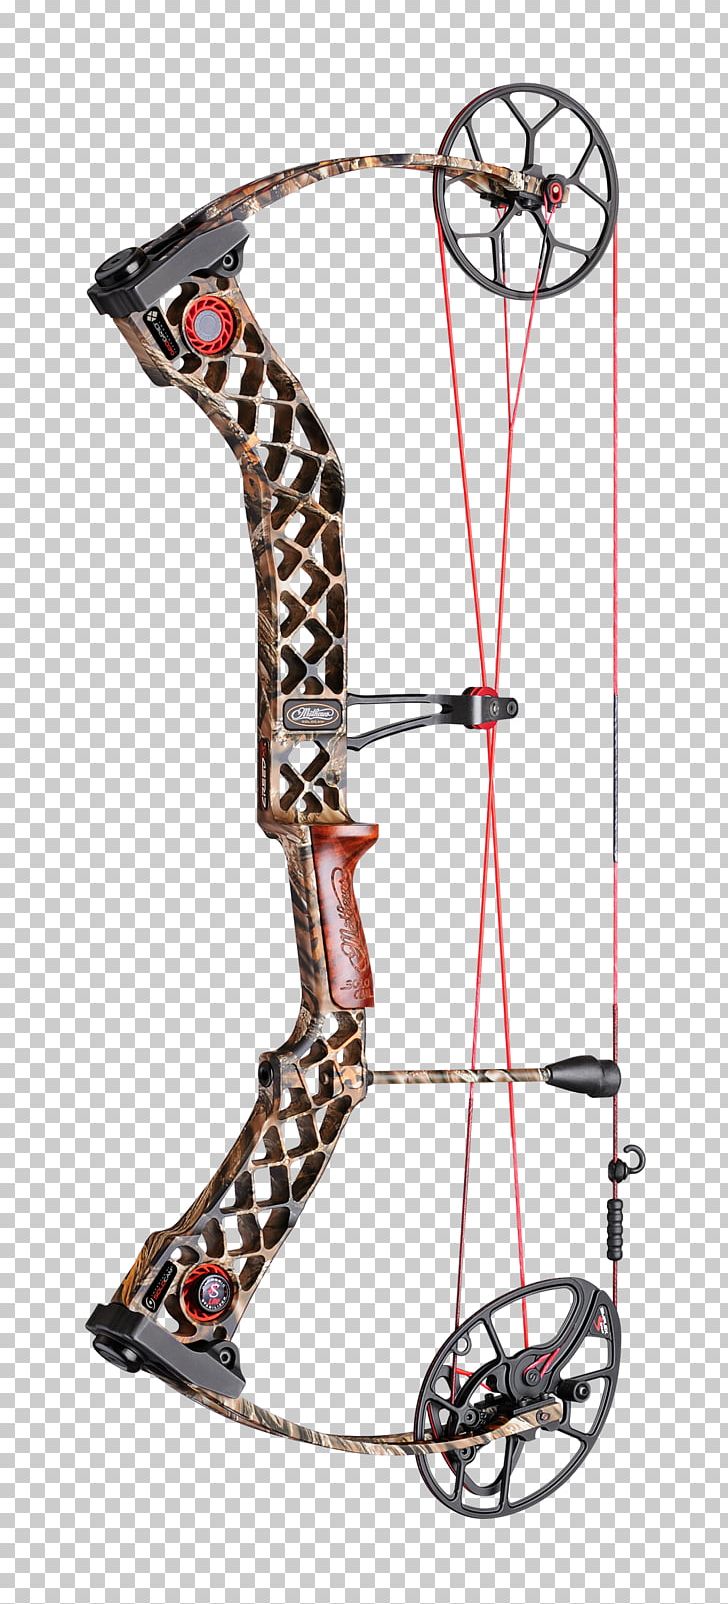 Bowhunting Compound Bows Bow And Arrow PNG, Clipart, Archery, Arrow, Bow, Bow And Arrow, Bowhunting Free PNG Download